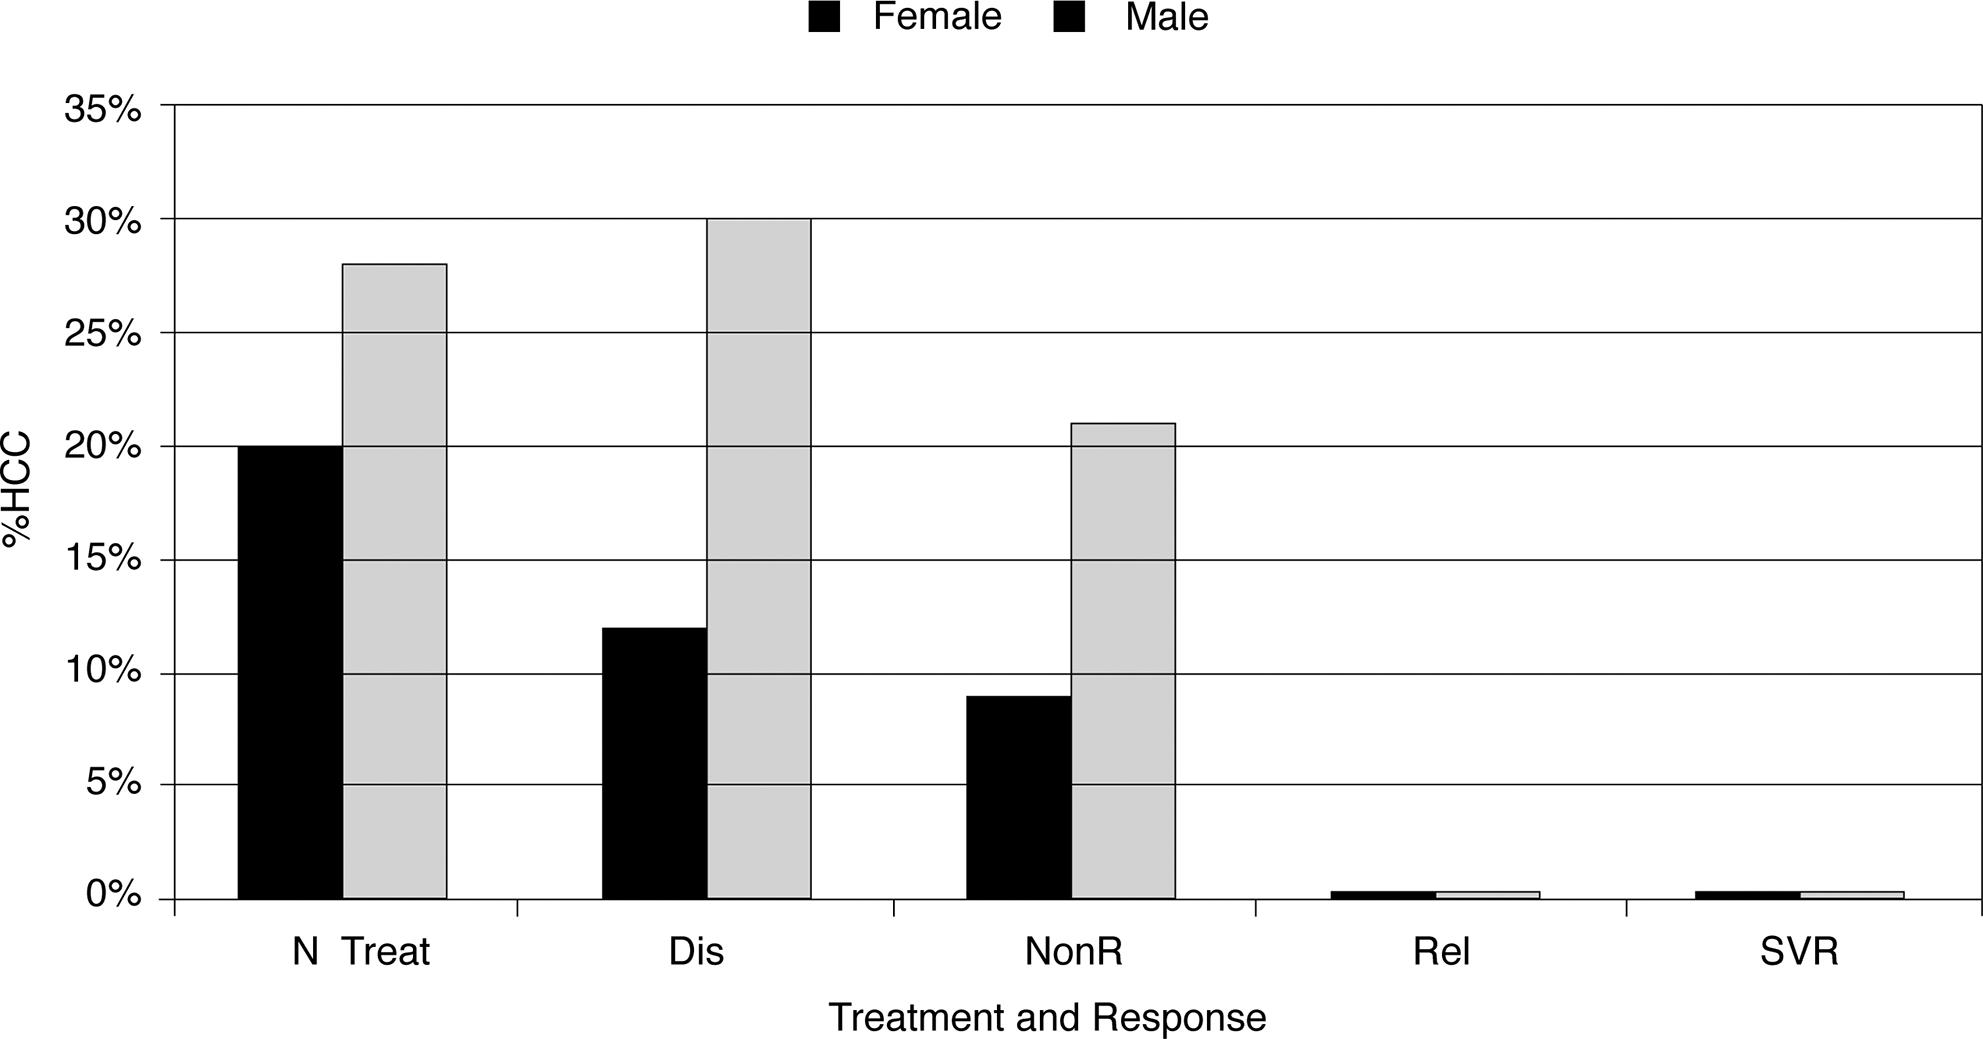 Patient treatment, response by gender, and development of HCC.